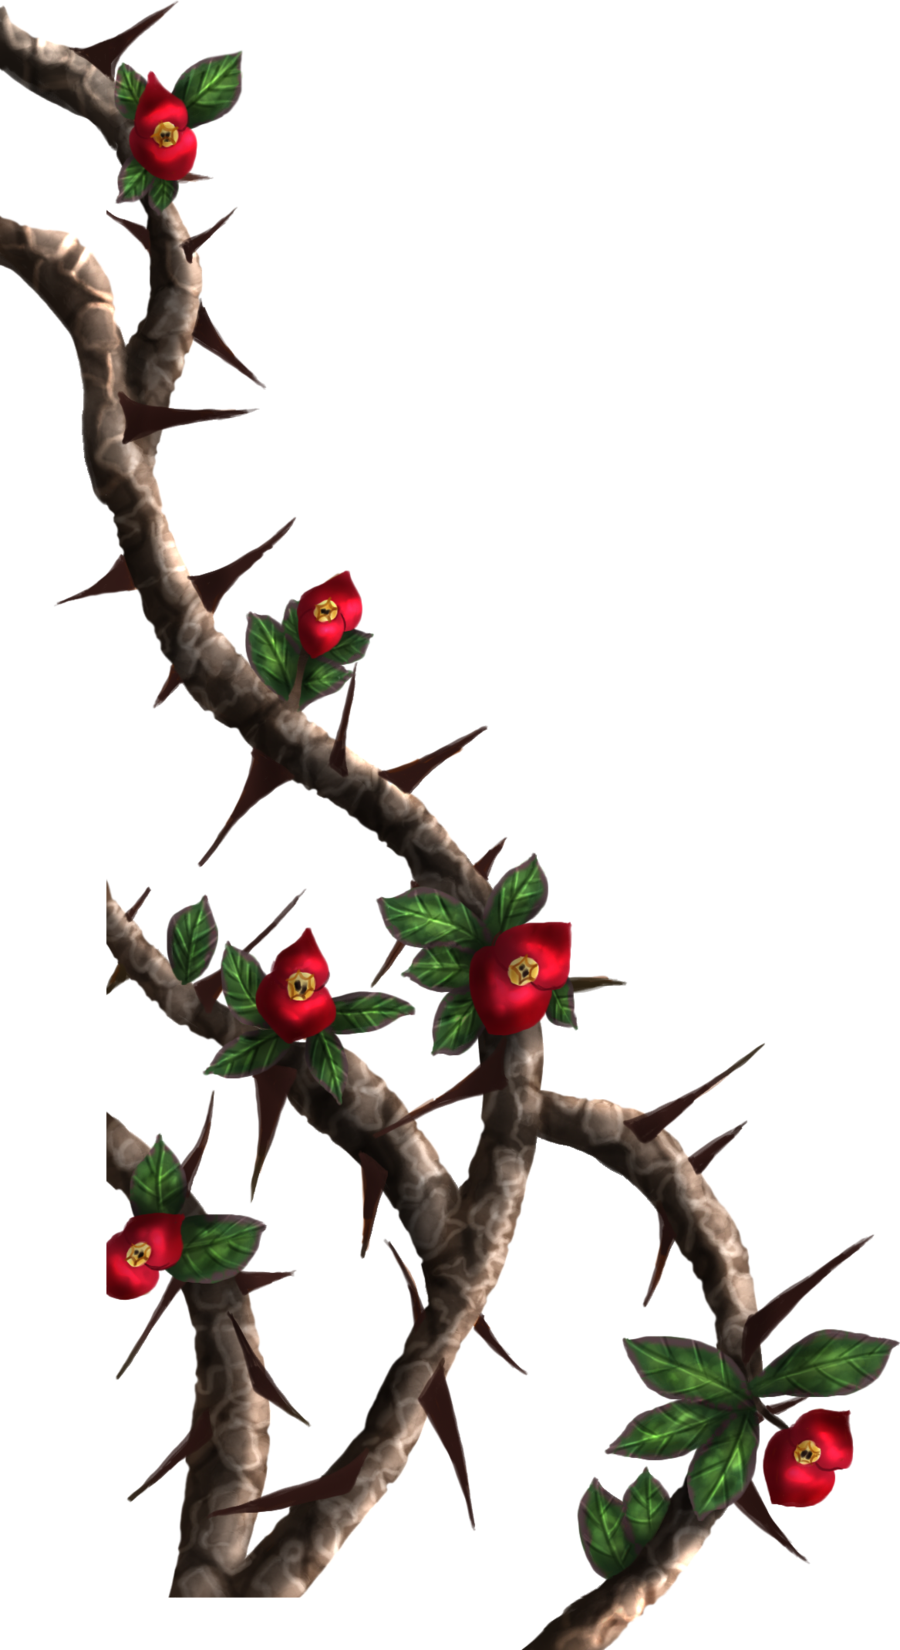 Thorn vines of painted. Nail clipart crown thorns